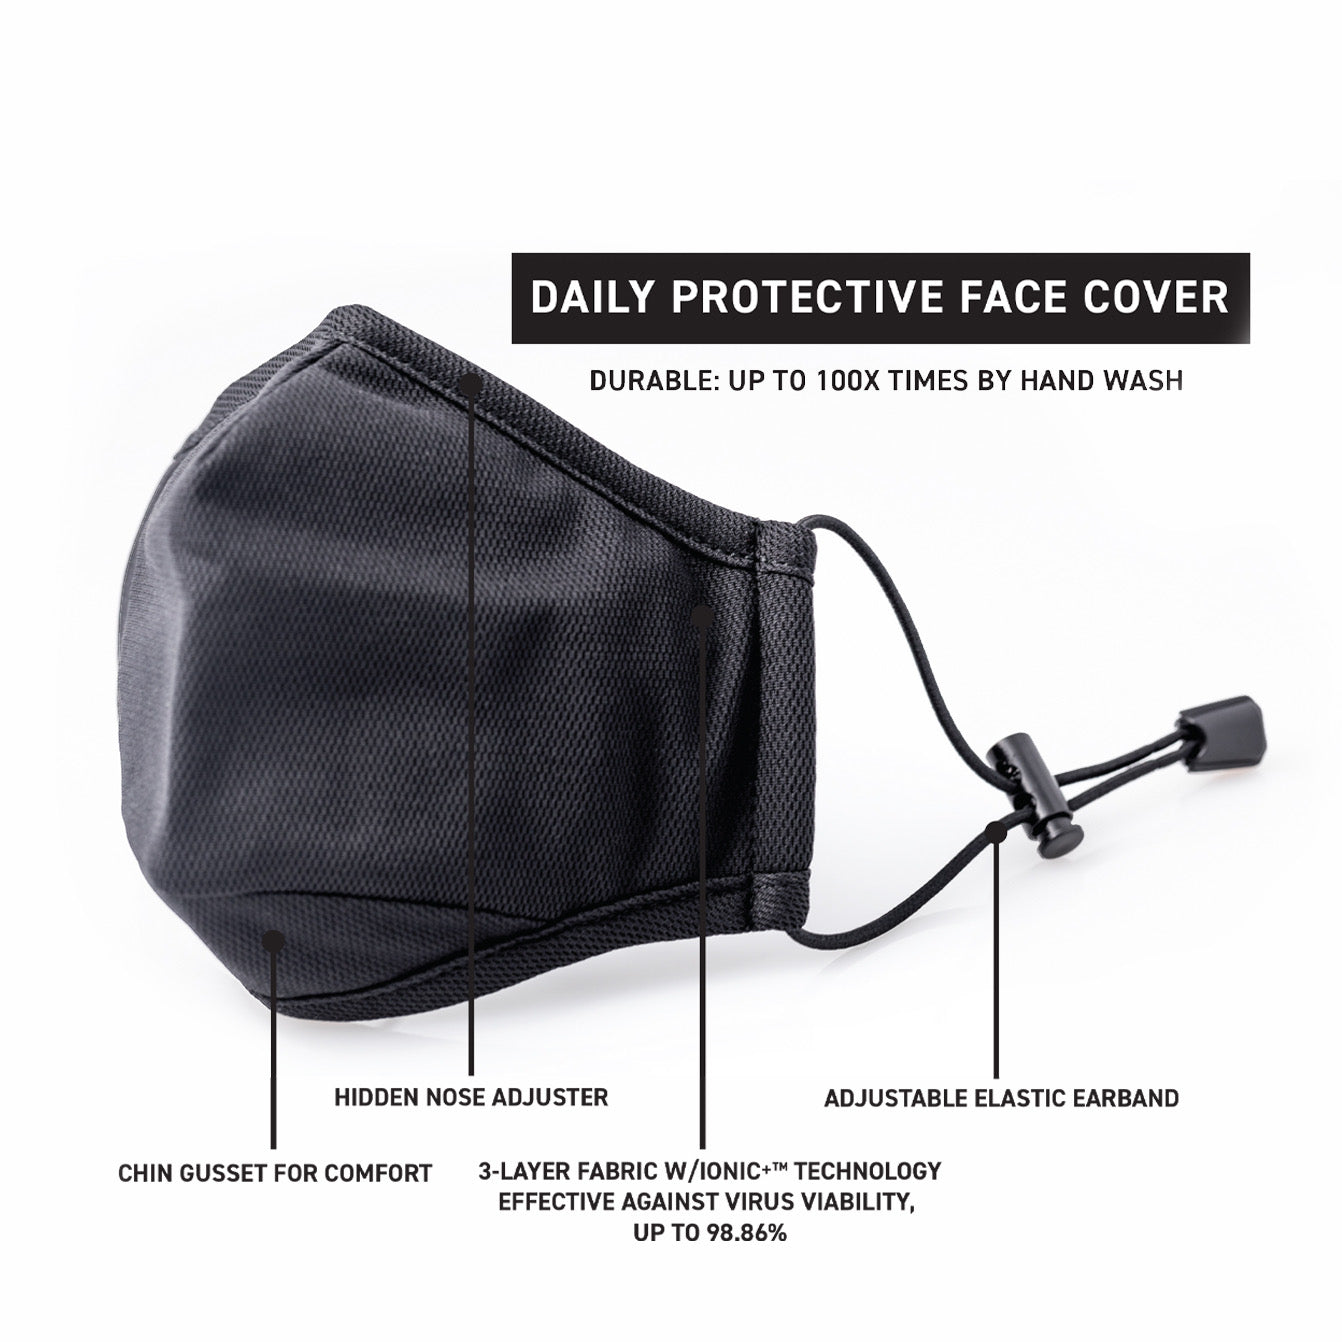 Face Mask for Protection. Effective Face Cover for Men, Breathable, Adjustable, Soft, Washable, Reusable, Comfortable for Workouts and other Exercises, with Odor Control